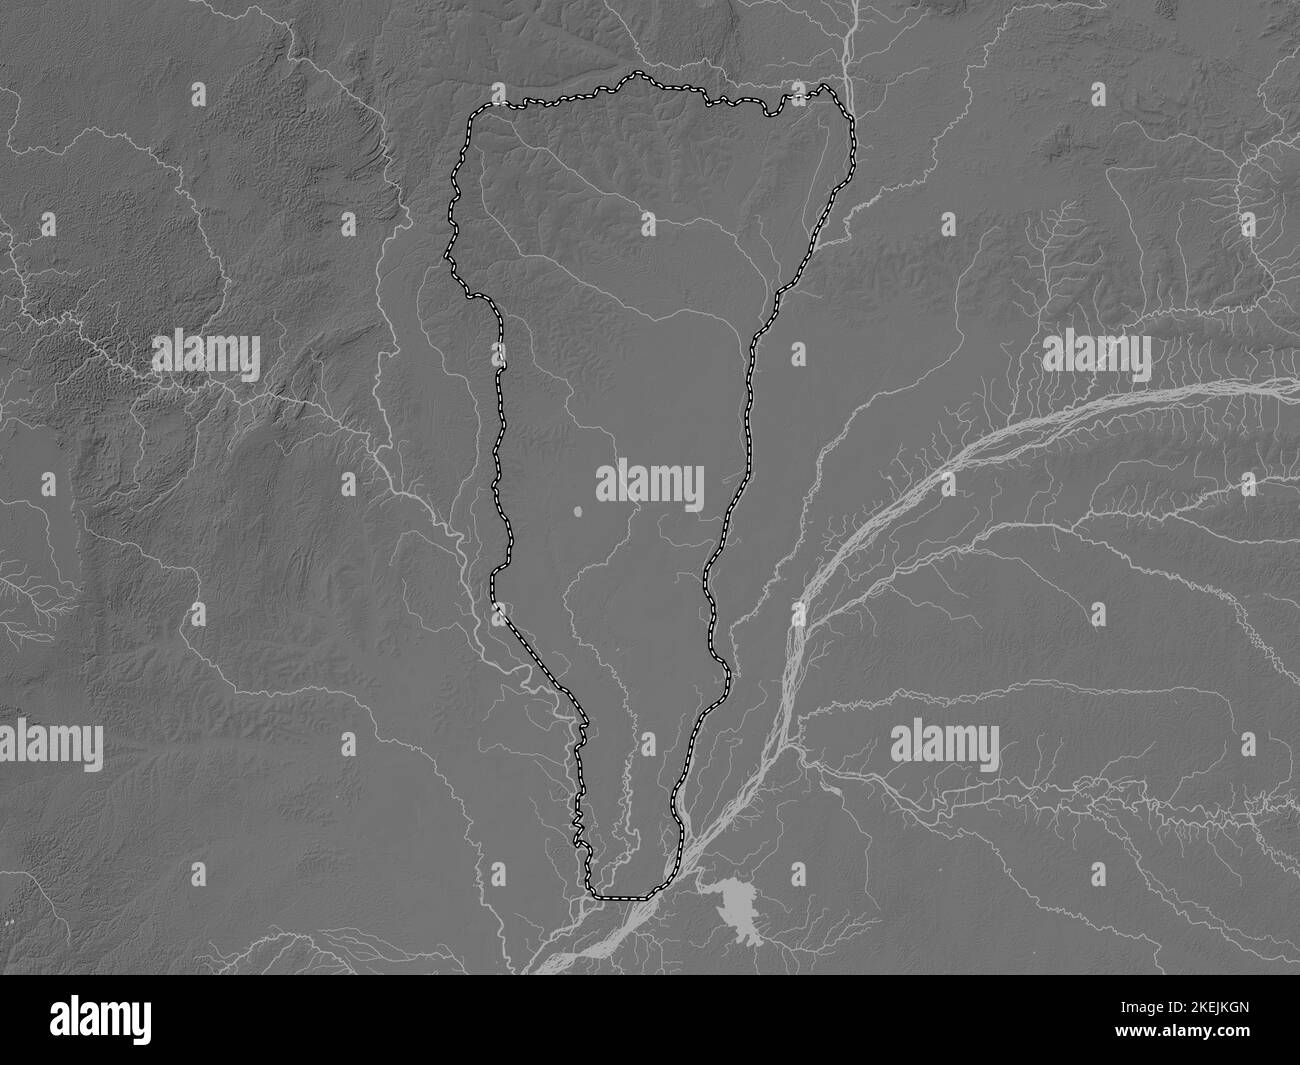 Likouala, region of Republic of Congo. Grayscale elevation map with lakes and rivers Stock Photo